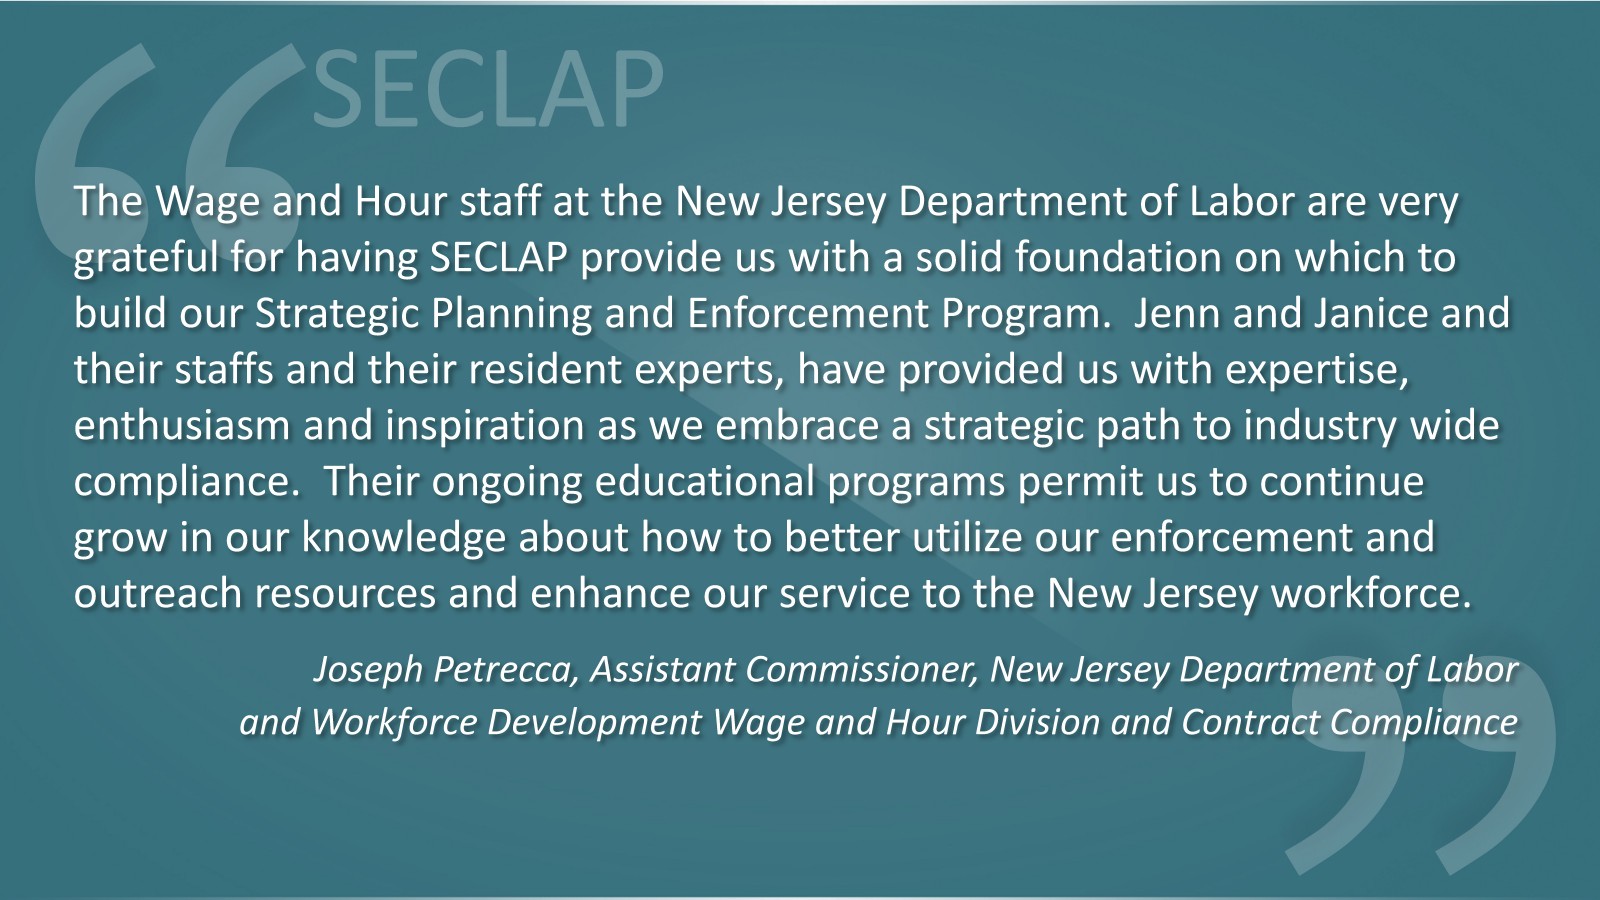 Quote from Joseph Petrecca, Assistant Commissioner, NJDOL Wage and Hour Division and Contract Compliance